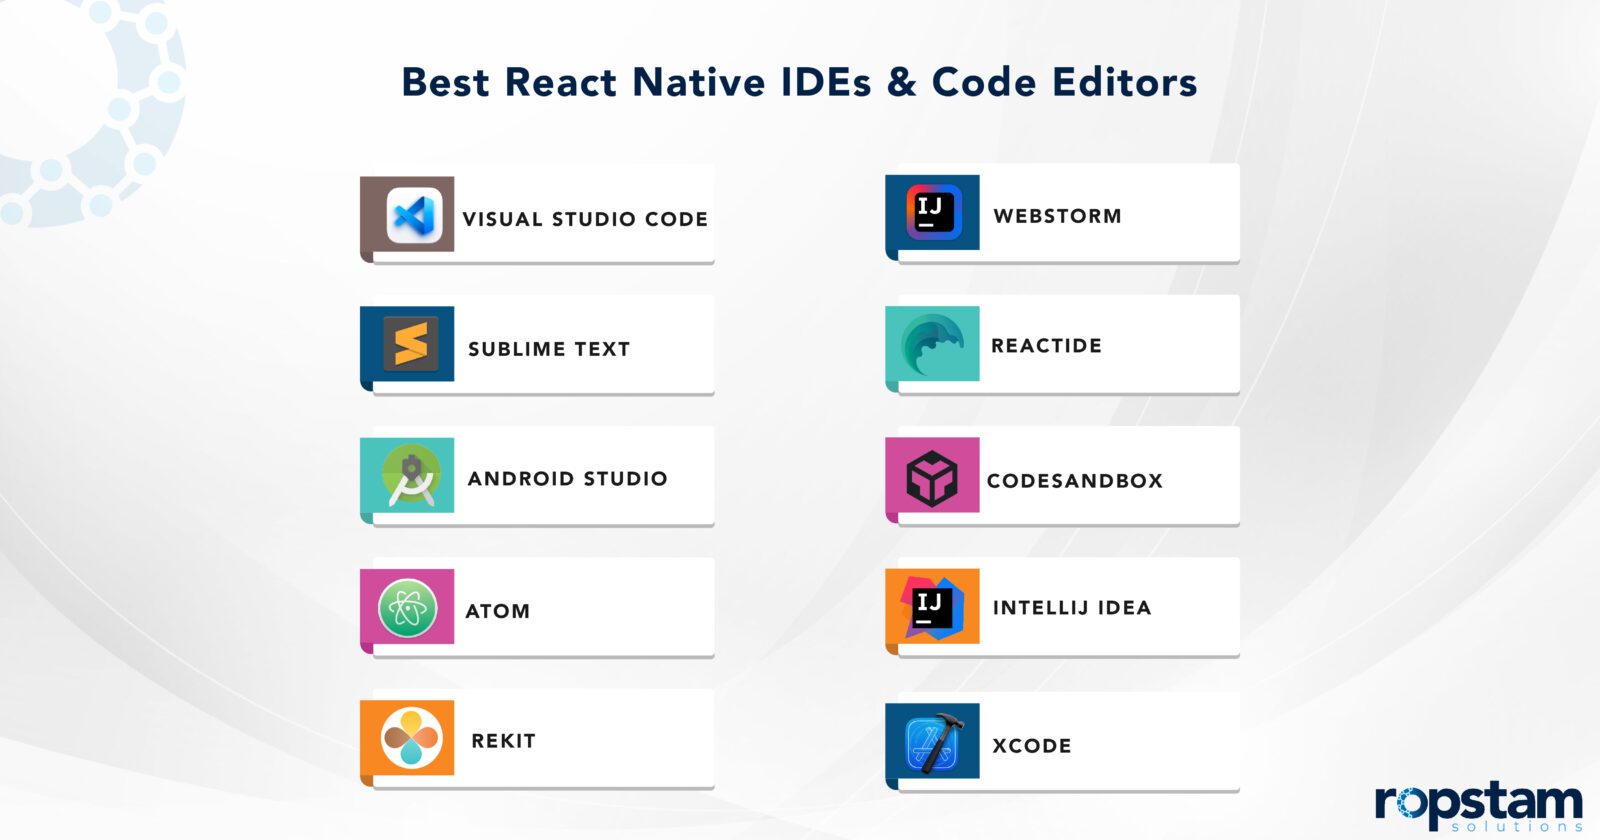 top-rated ides and code editors for react native